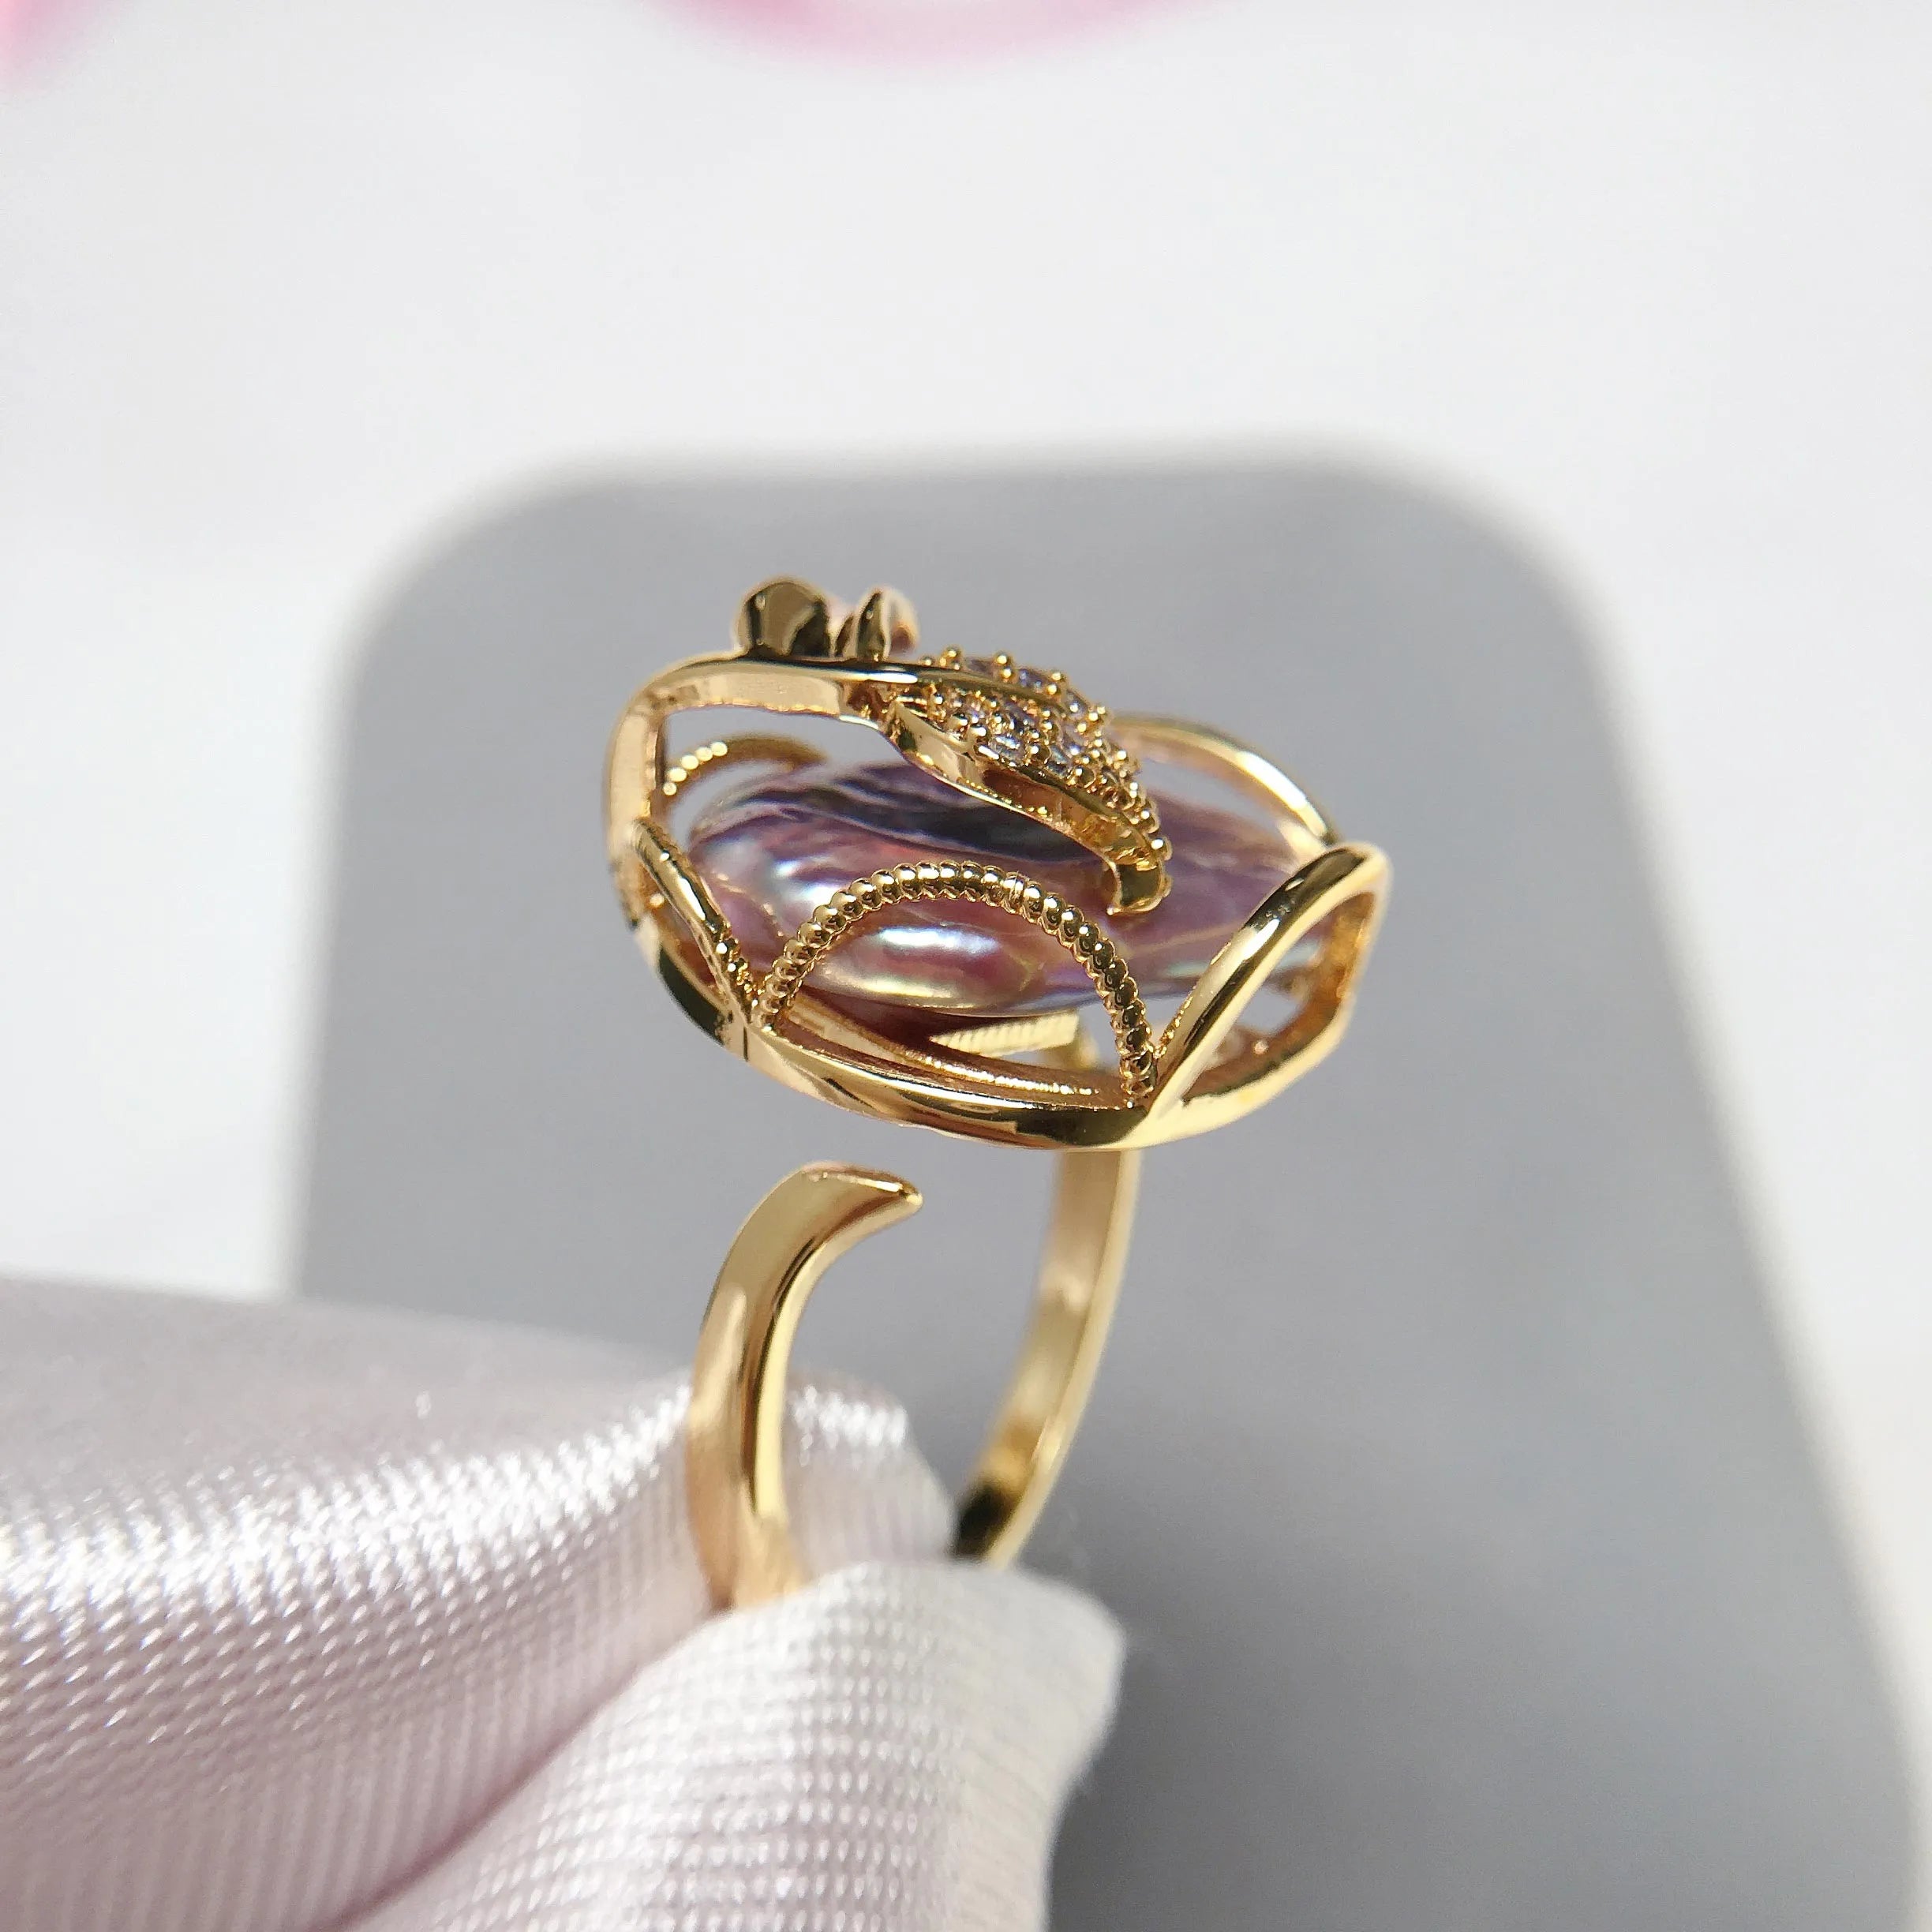 Baroque Pearl Ring with 18K Gold Plating